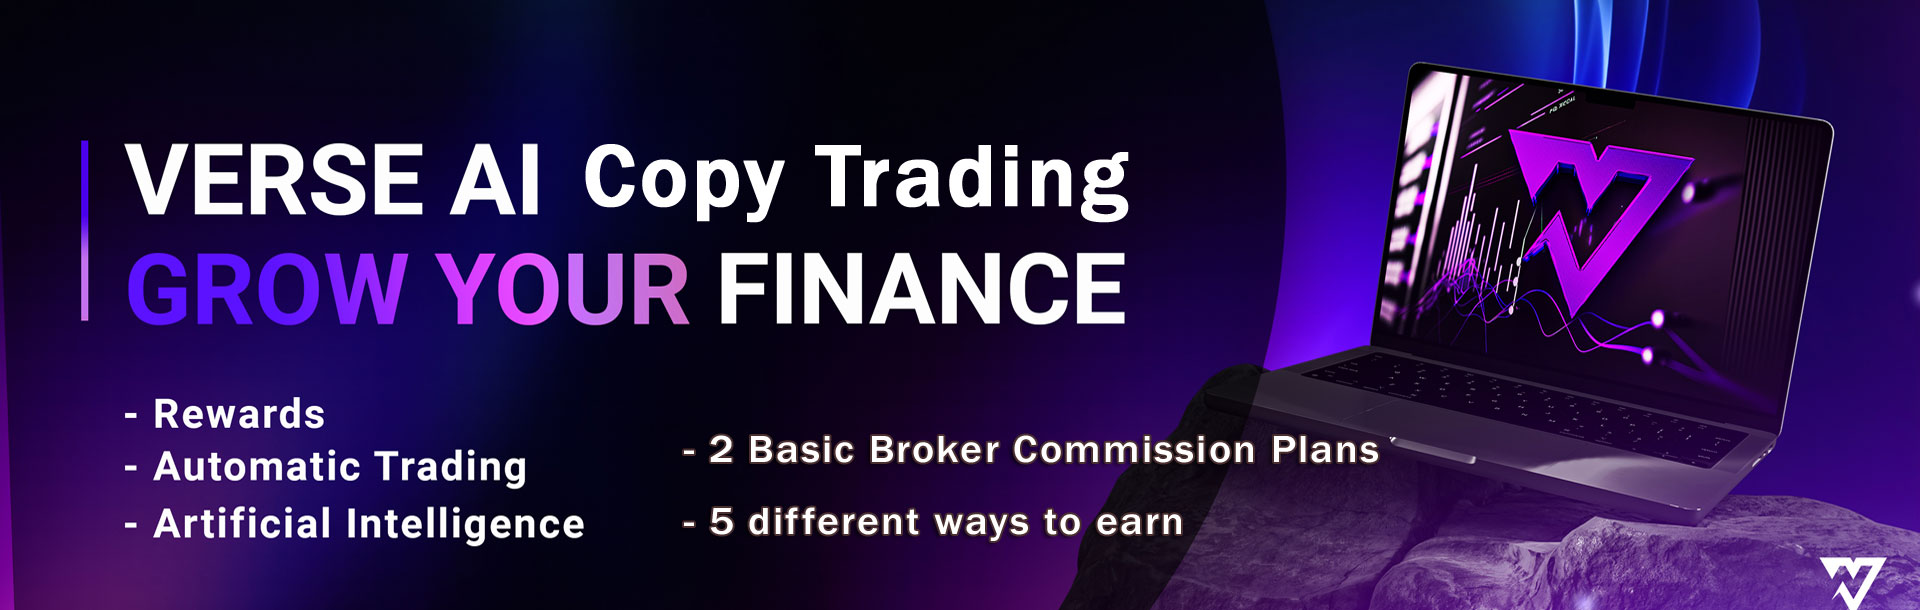 Verse Corp Forex Copy Trading